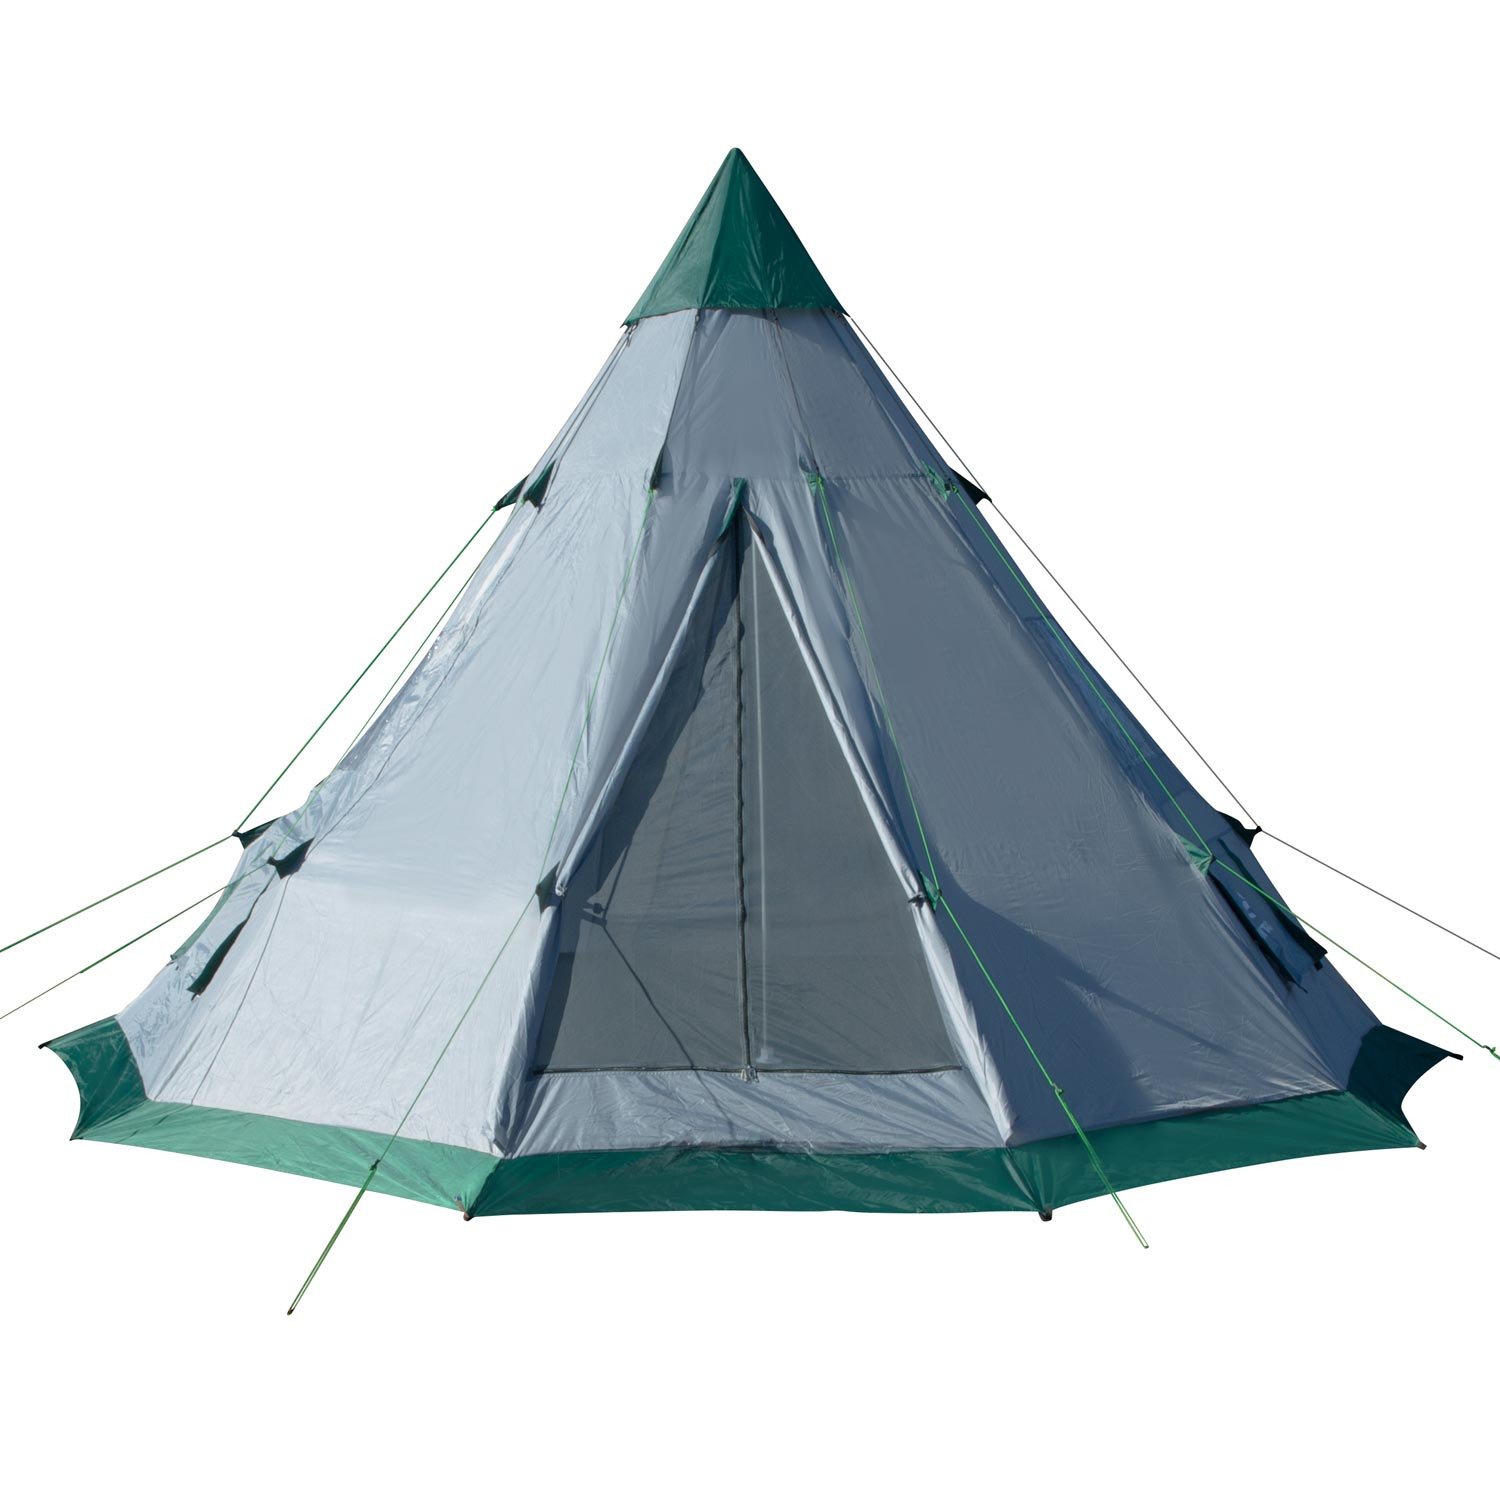 12-foot Diameter 7-Person Family Camping Teepee Tent - Winterial.com